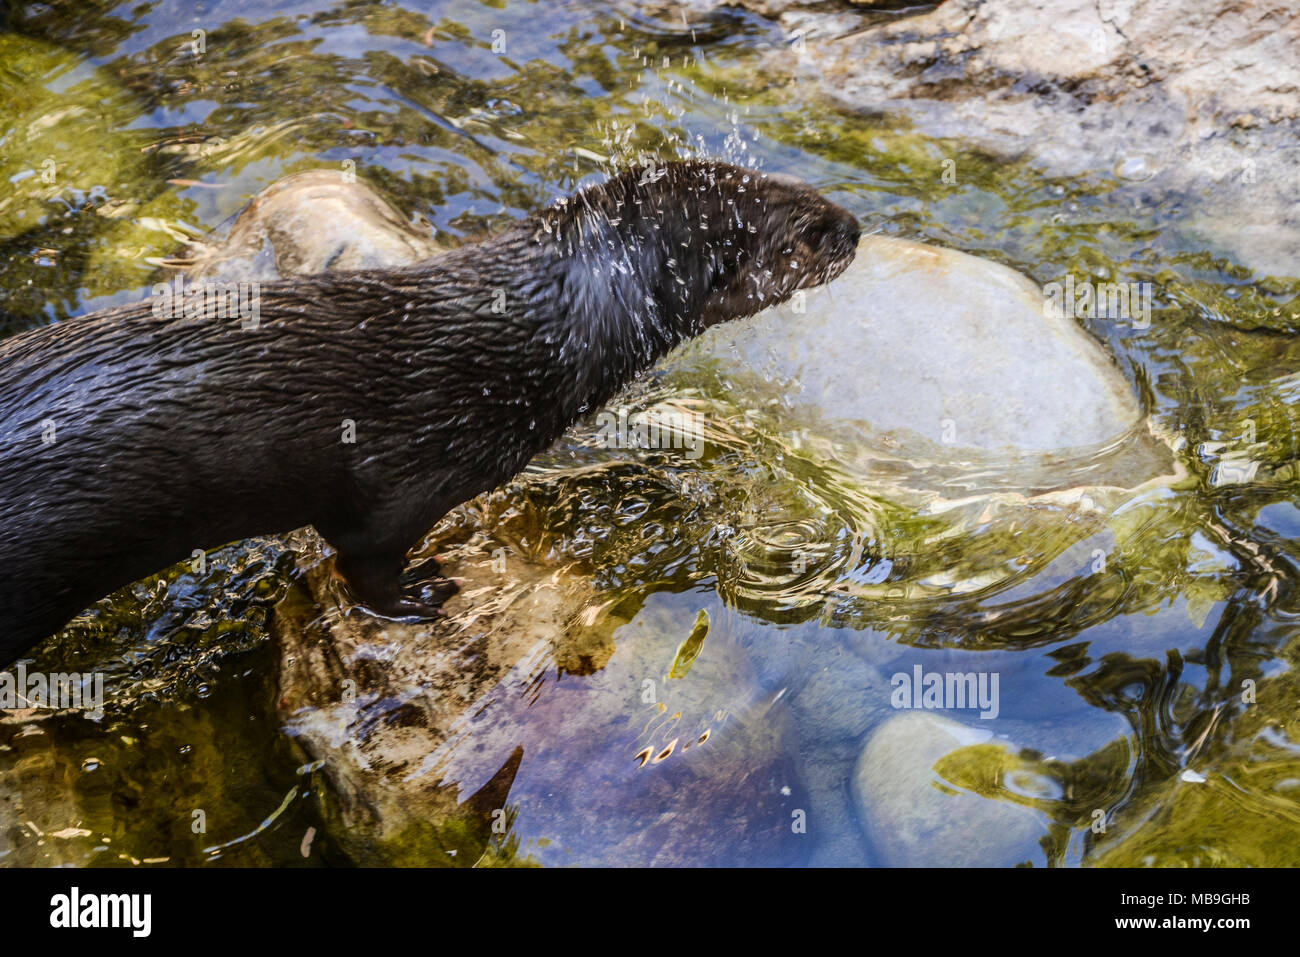 A spotted-necked otter (Hydrictis maculicollis) shaking off water in Cango Wildlife Ranch, South Africa Stock Photo